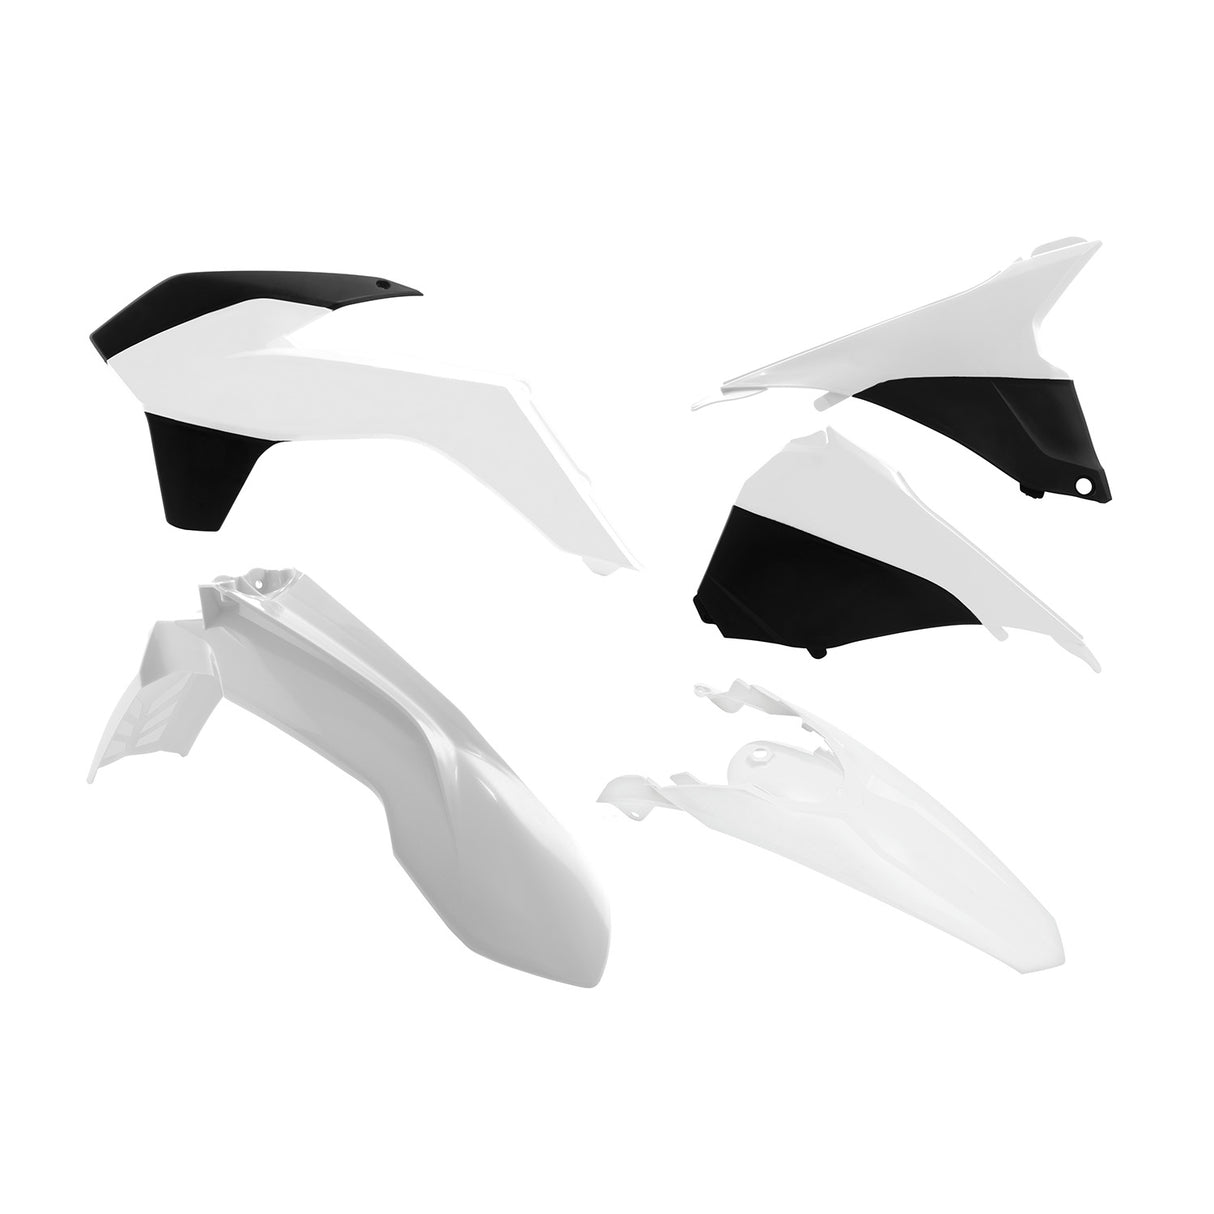 Rtech Plastic Kit (5pc) With Air Box Cover (White-Black) KTM EXC-EXCF125-200-250-350-450-500 14-16